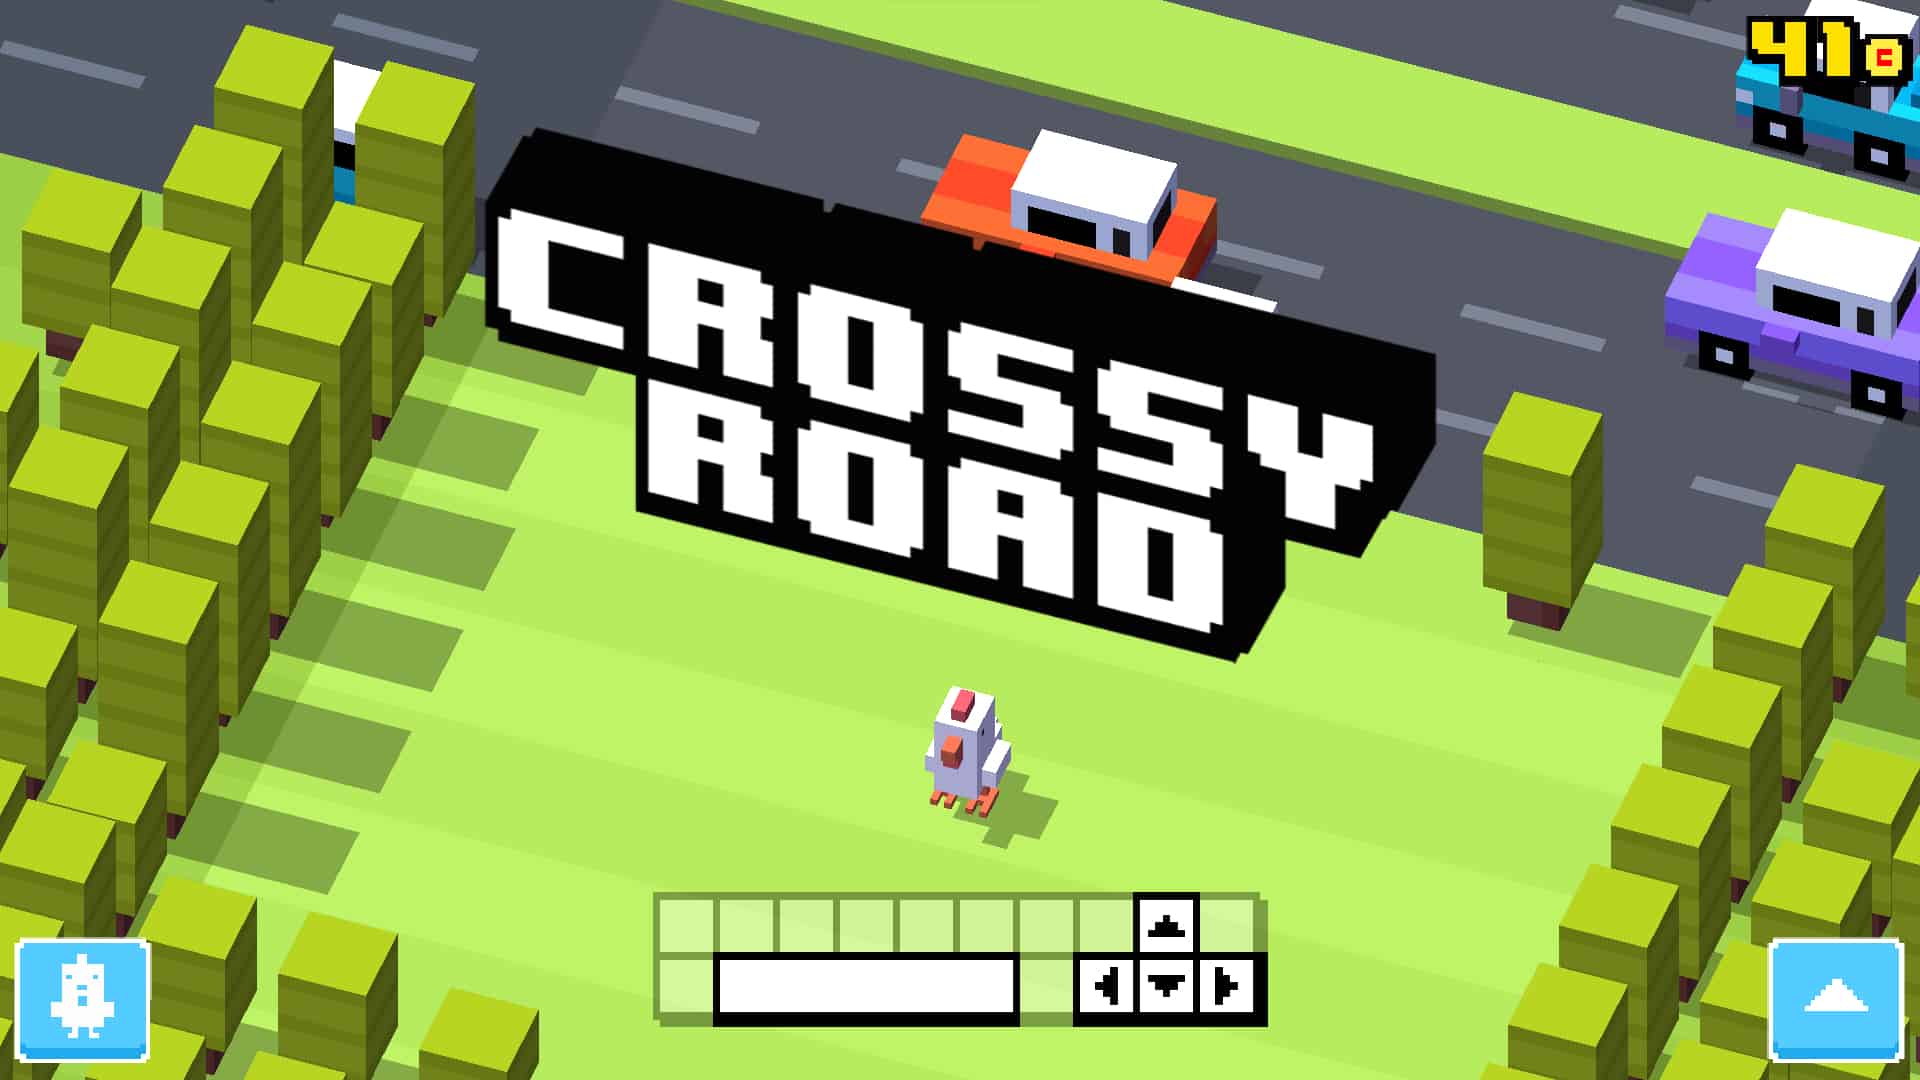 Chicken Cross The Road Game Download for PC